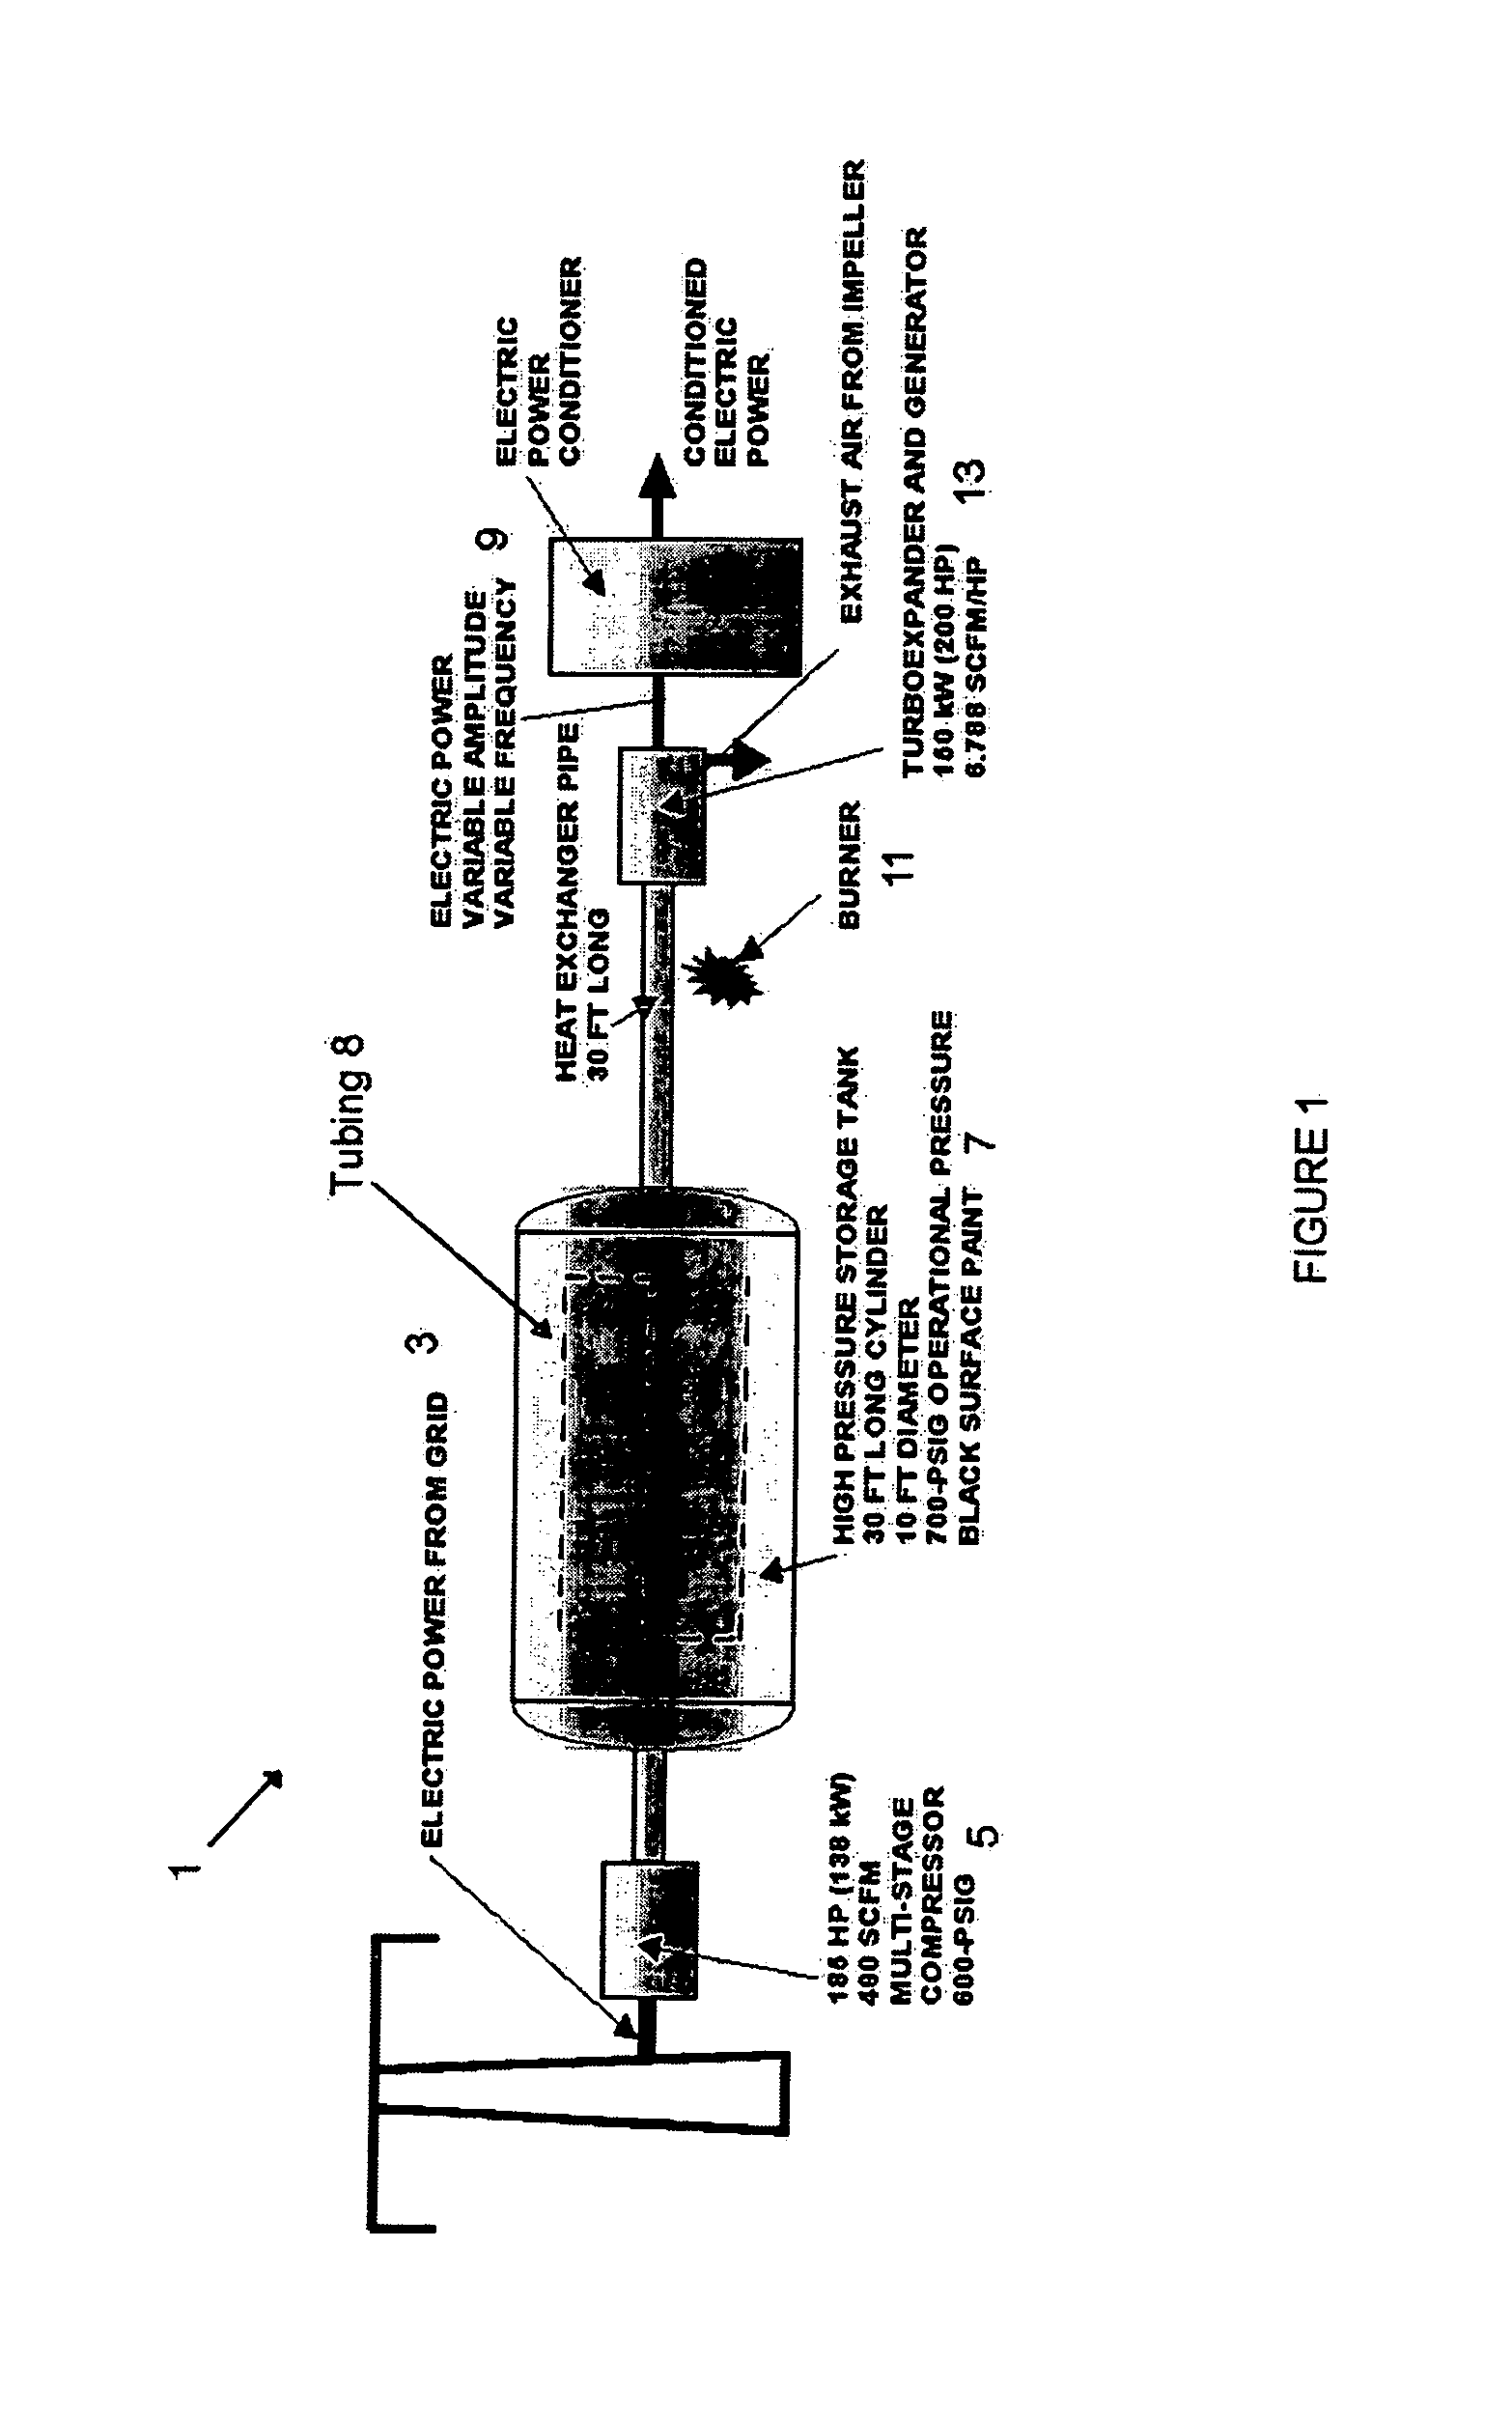 Method and apparatus for storing and using energy to reduce the end-user cost of energy